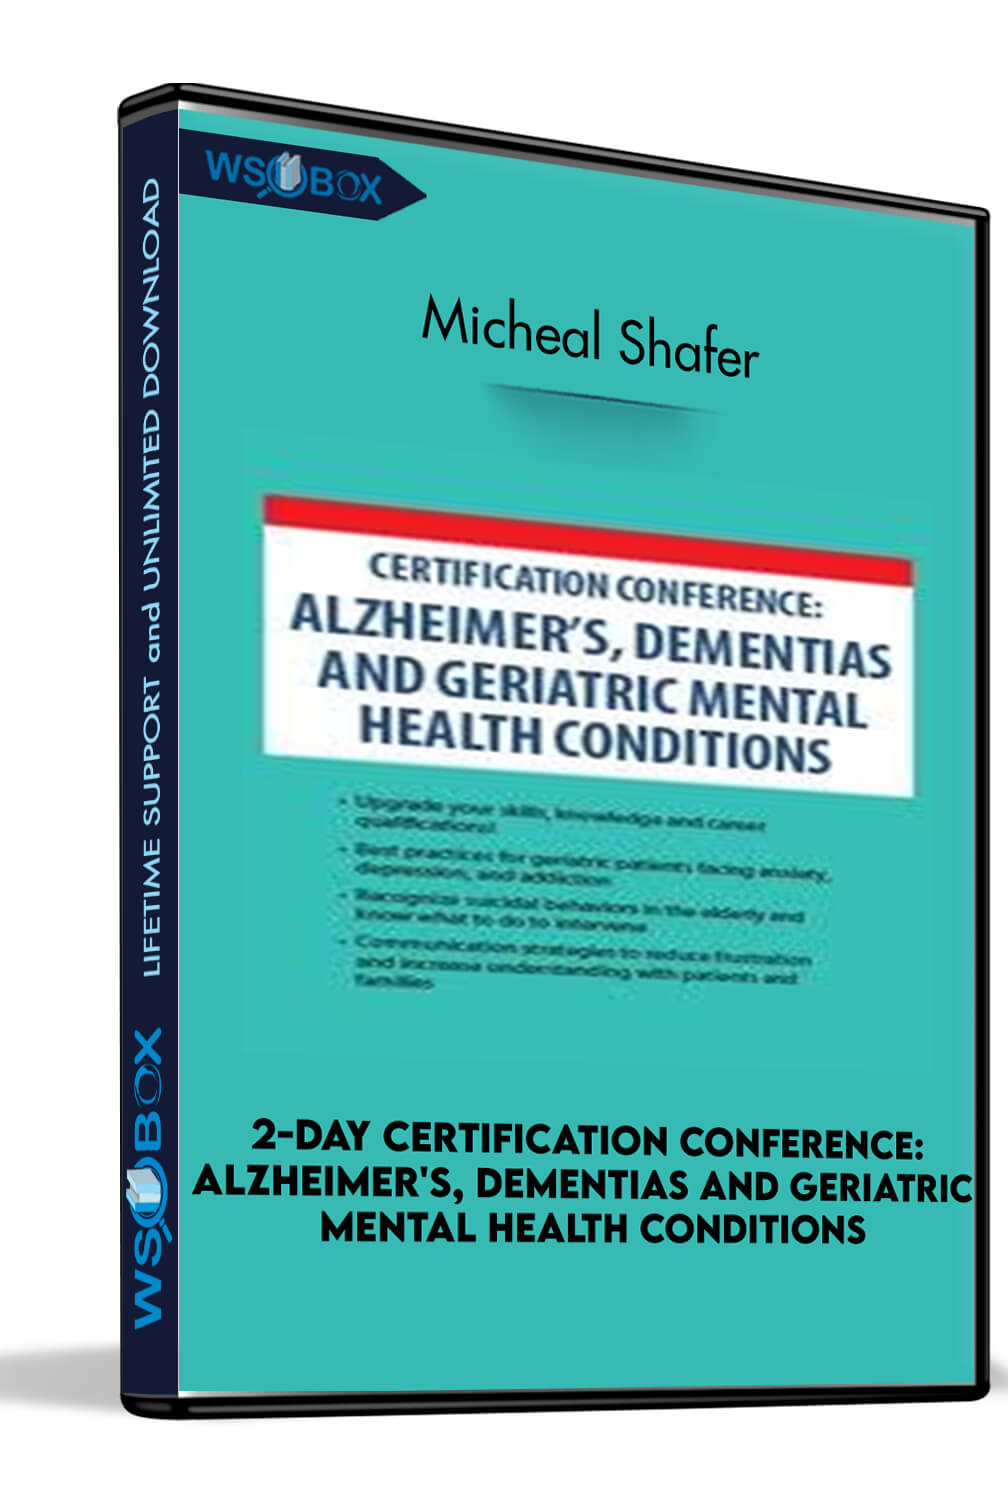 2-Day Certification Conference: Alzheimer’s, Dementias and Geriatric Mental Health Conditions – Micheal Shafer